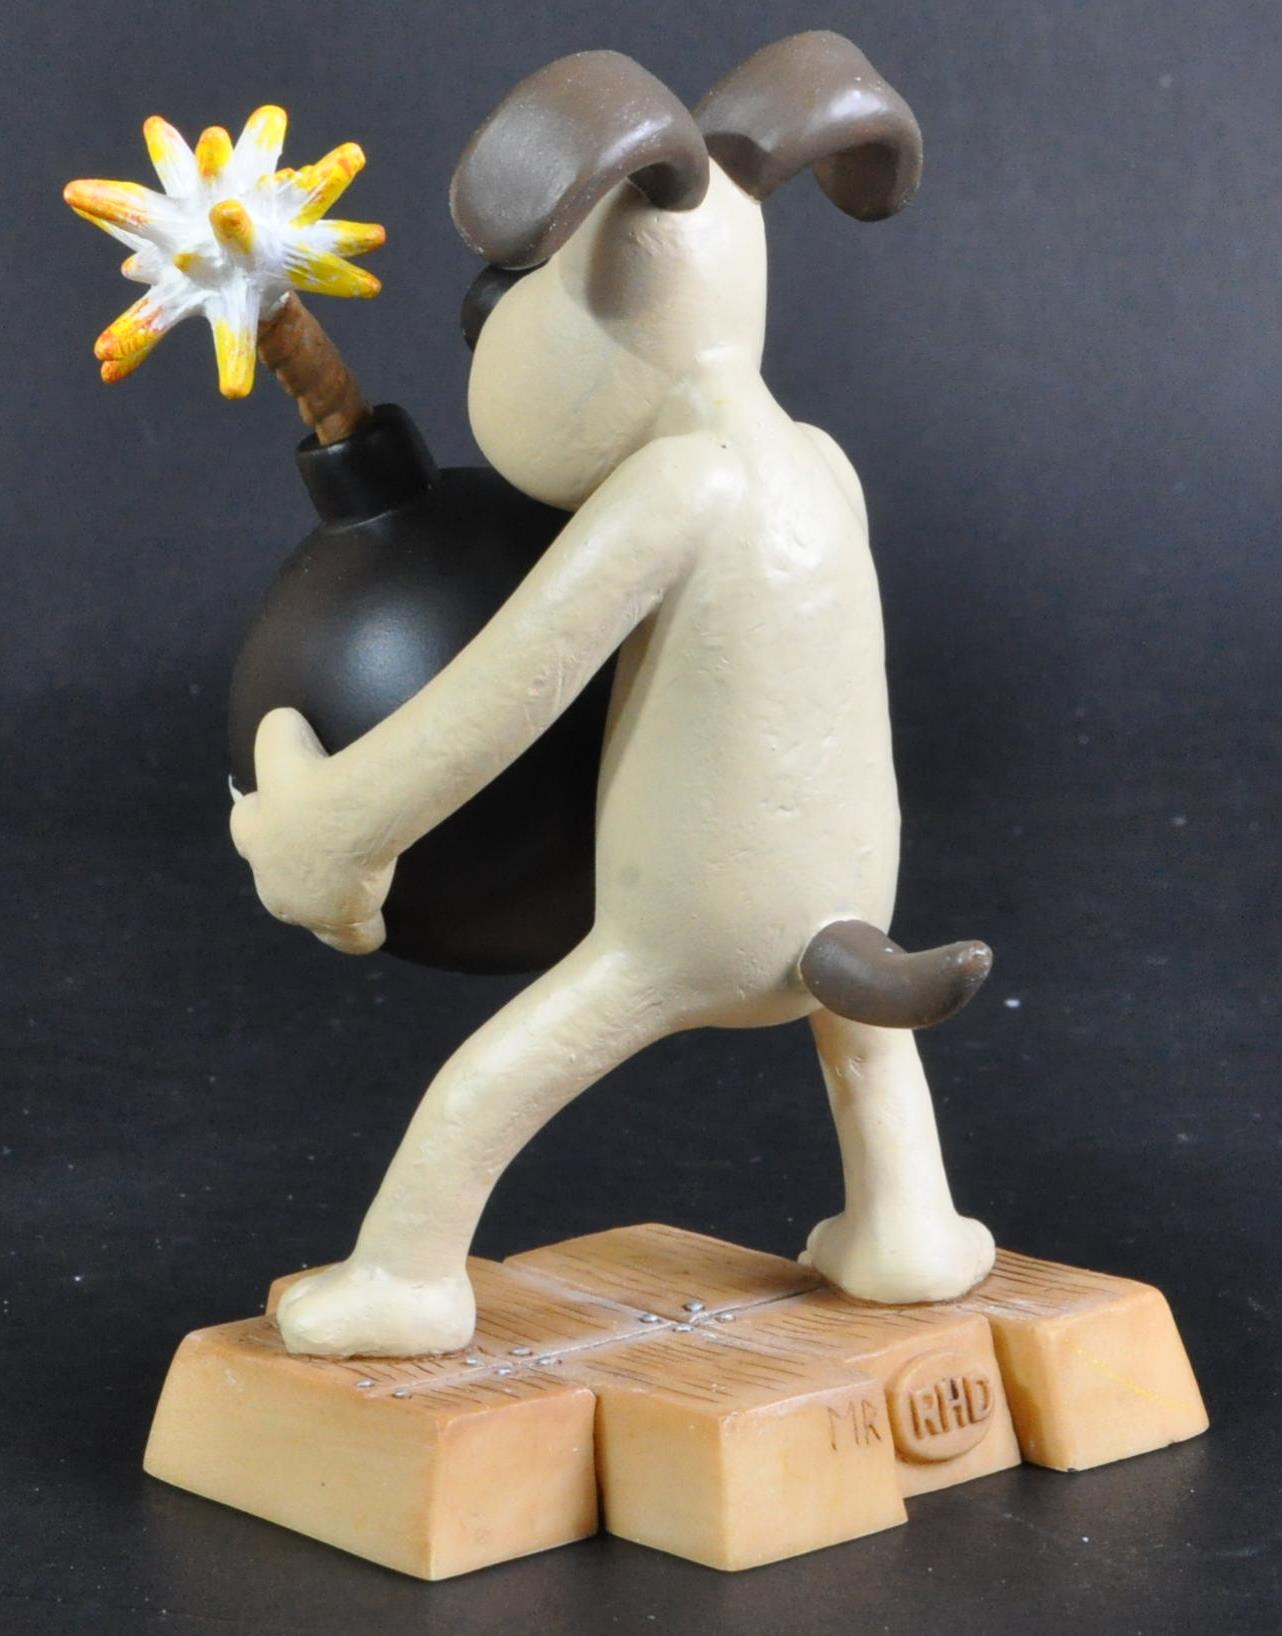 WALLACE & GROMIT - ROBERT HARROP - LIMITED EDITION FIGURINE - Image 3 of 5